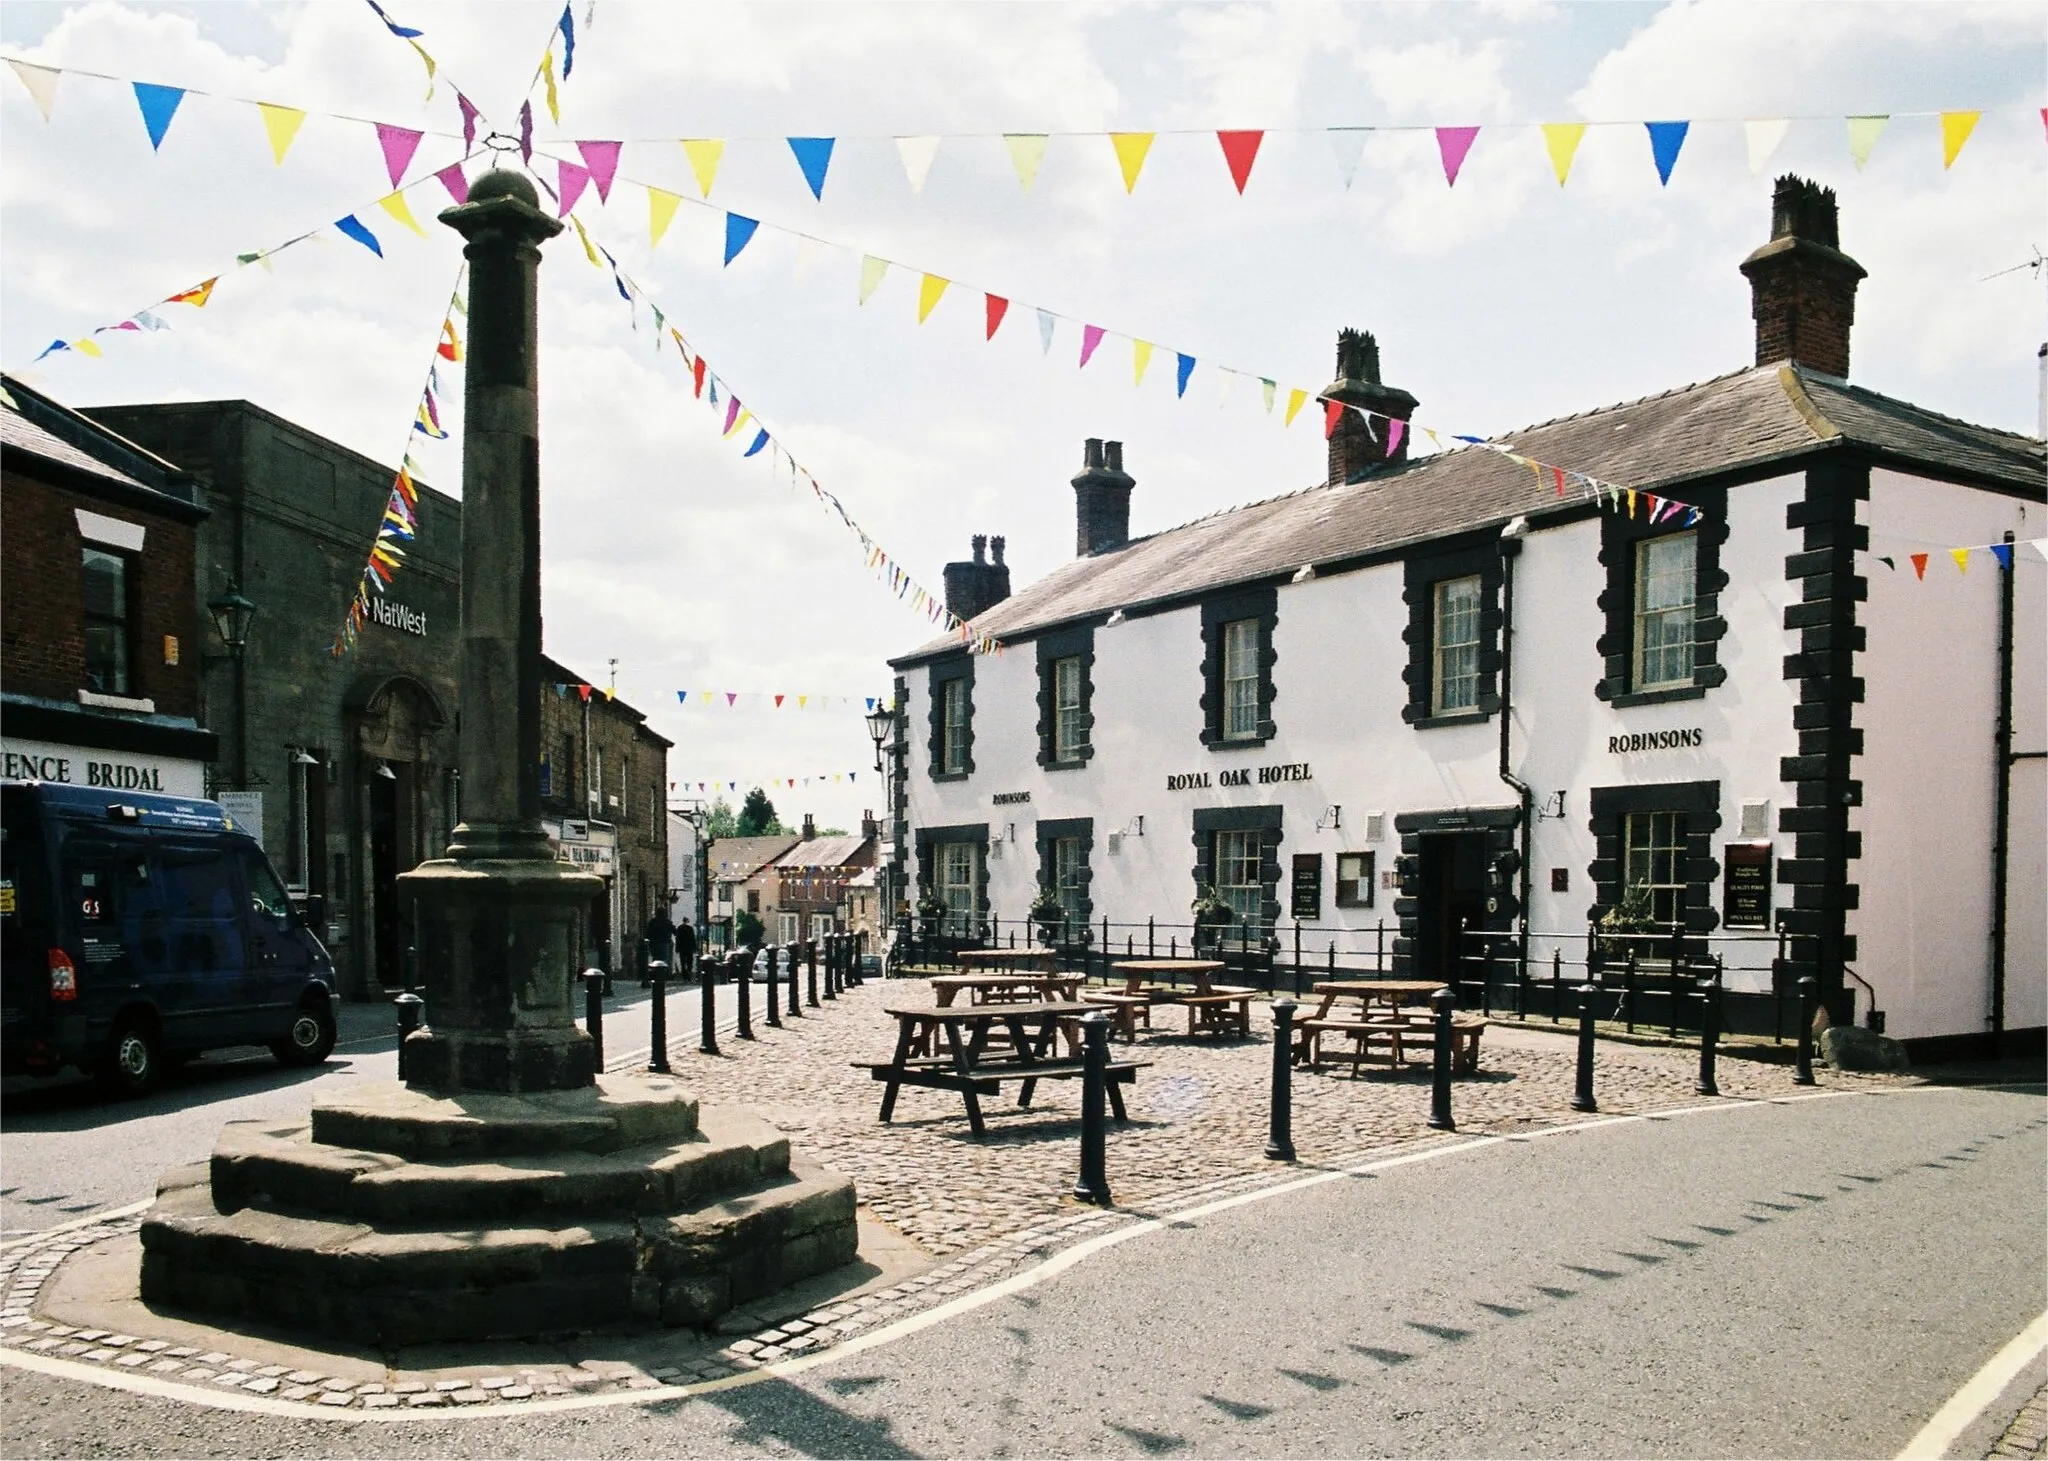 Photo showing: The market cross and Royal Oak in Garstang, Lancashire, England